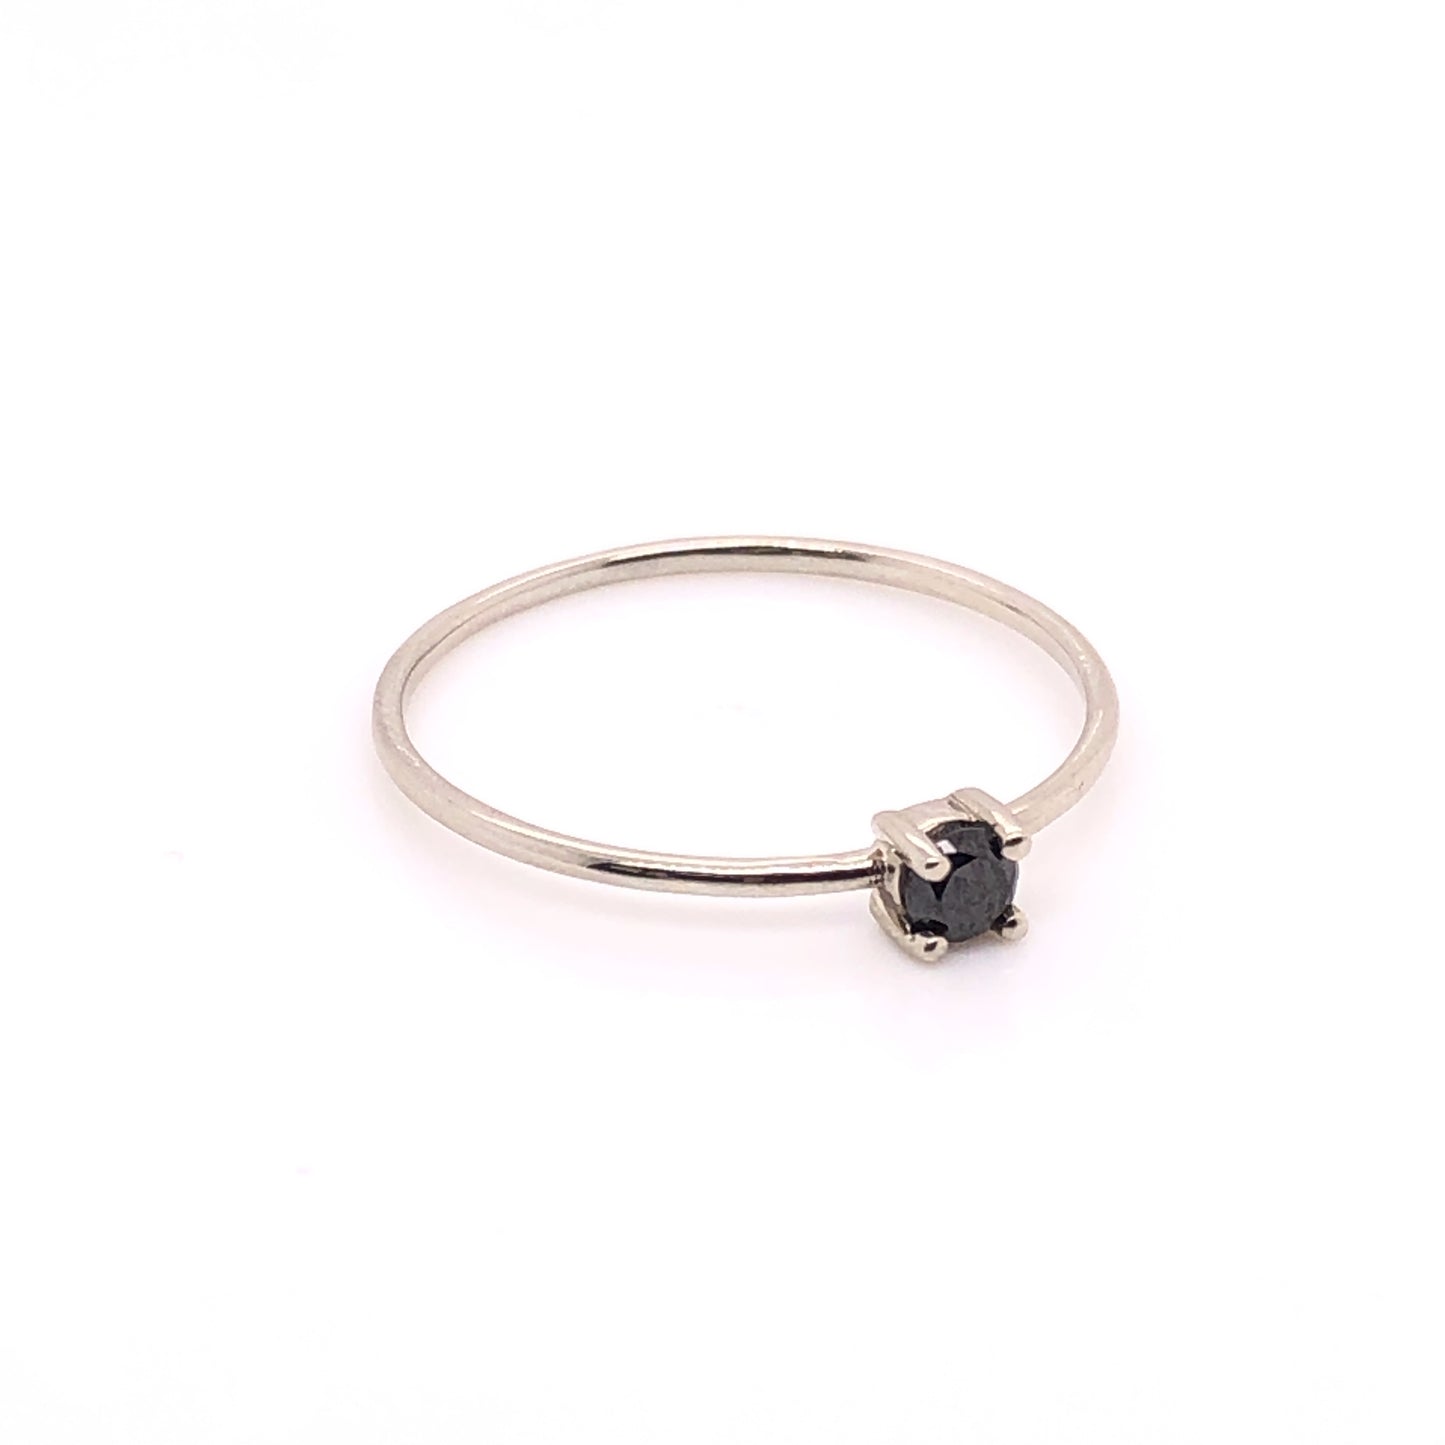 IMMEDIATE DELIVERY / Ring with Black Diamond / 14k White Gold / Size 7.75